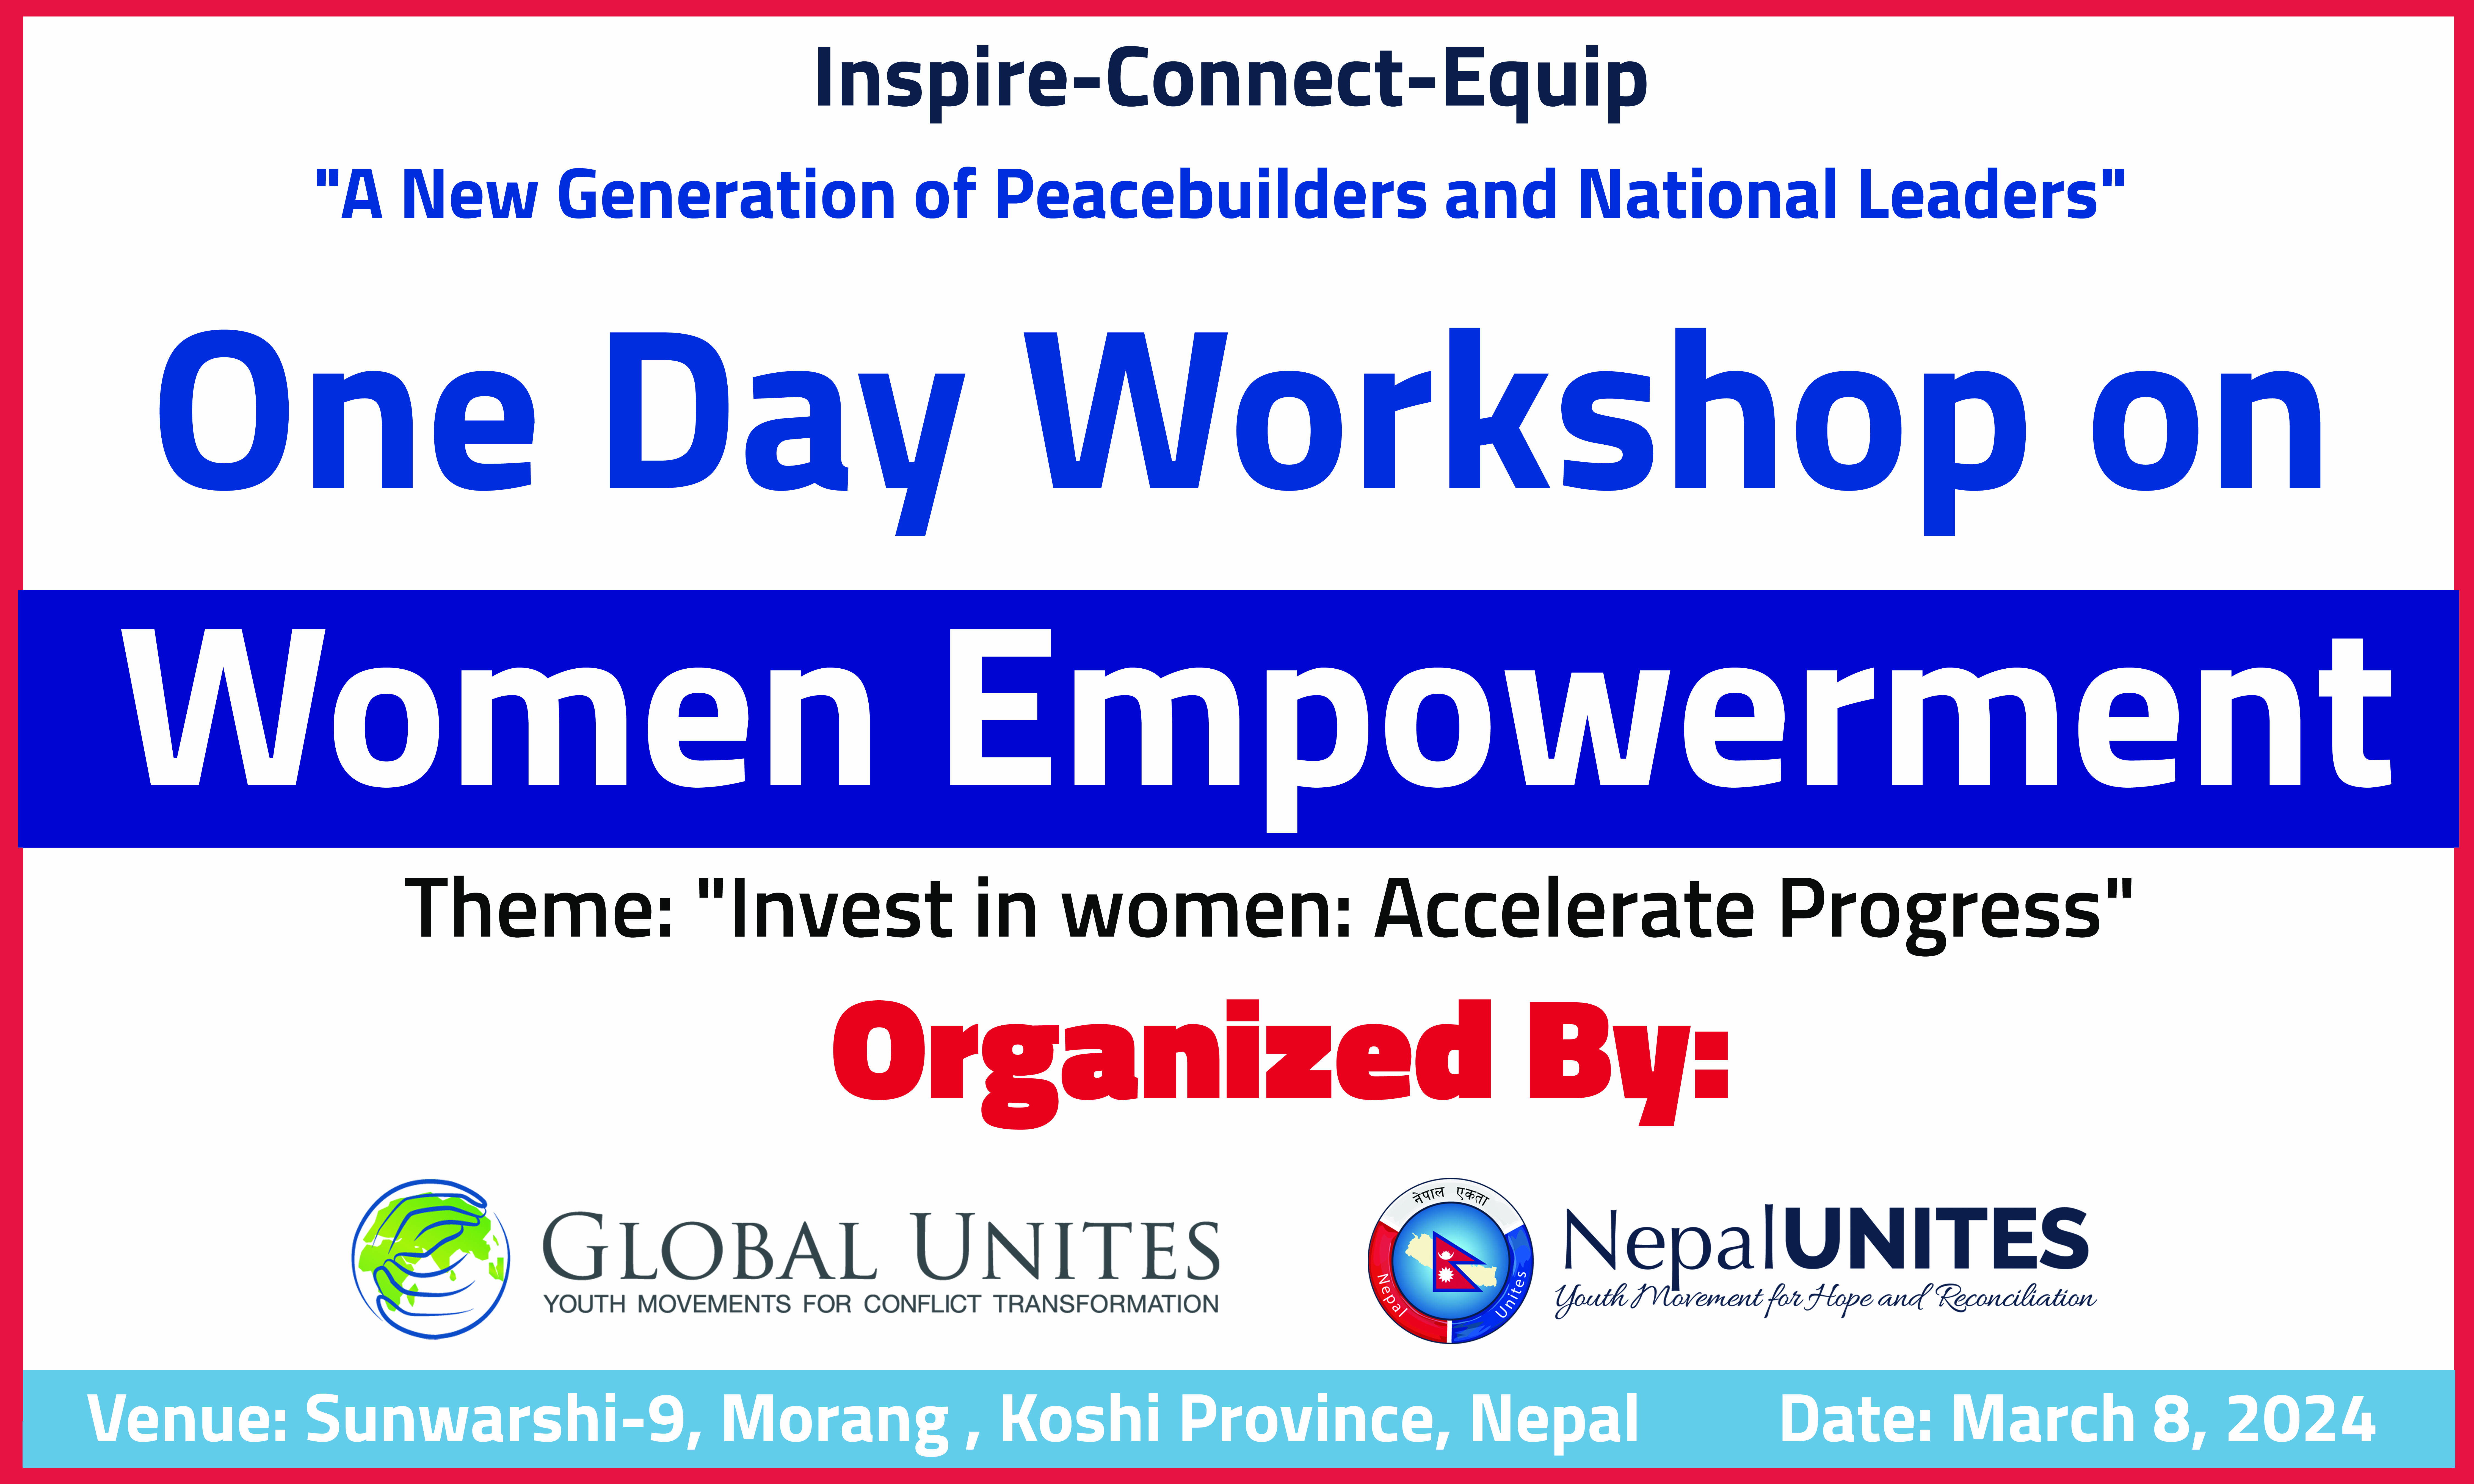 One Day Workshop on Women Empowerment